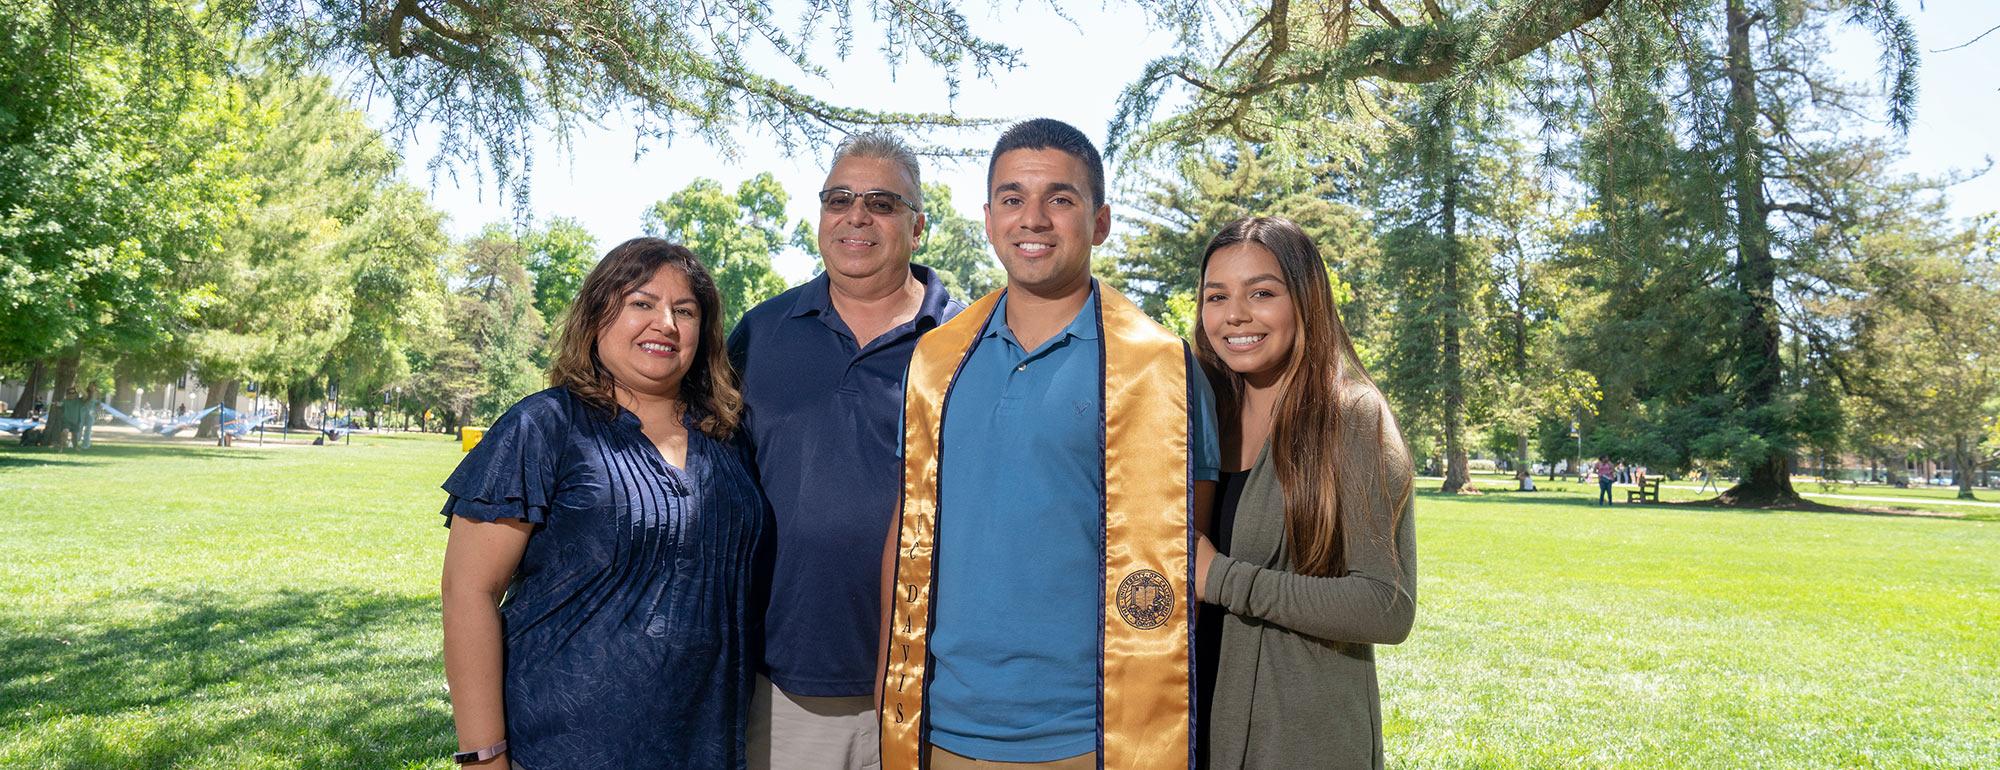 Parents pose with their ֱ graduate son on the quad 